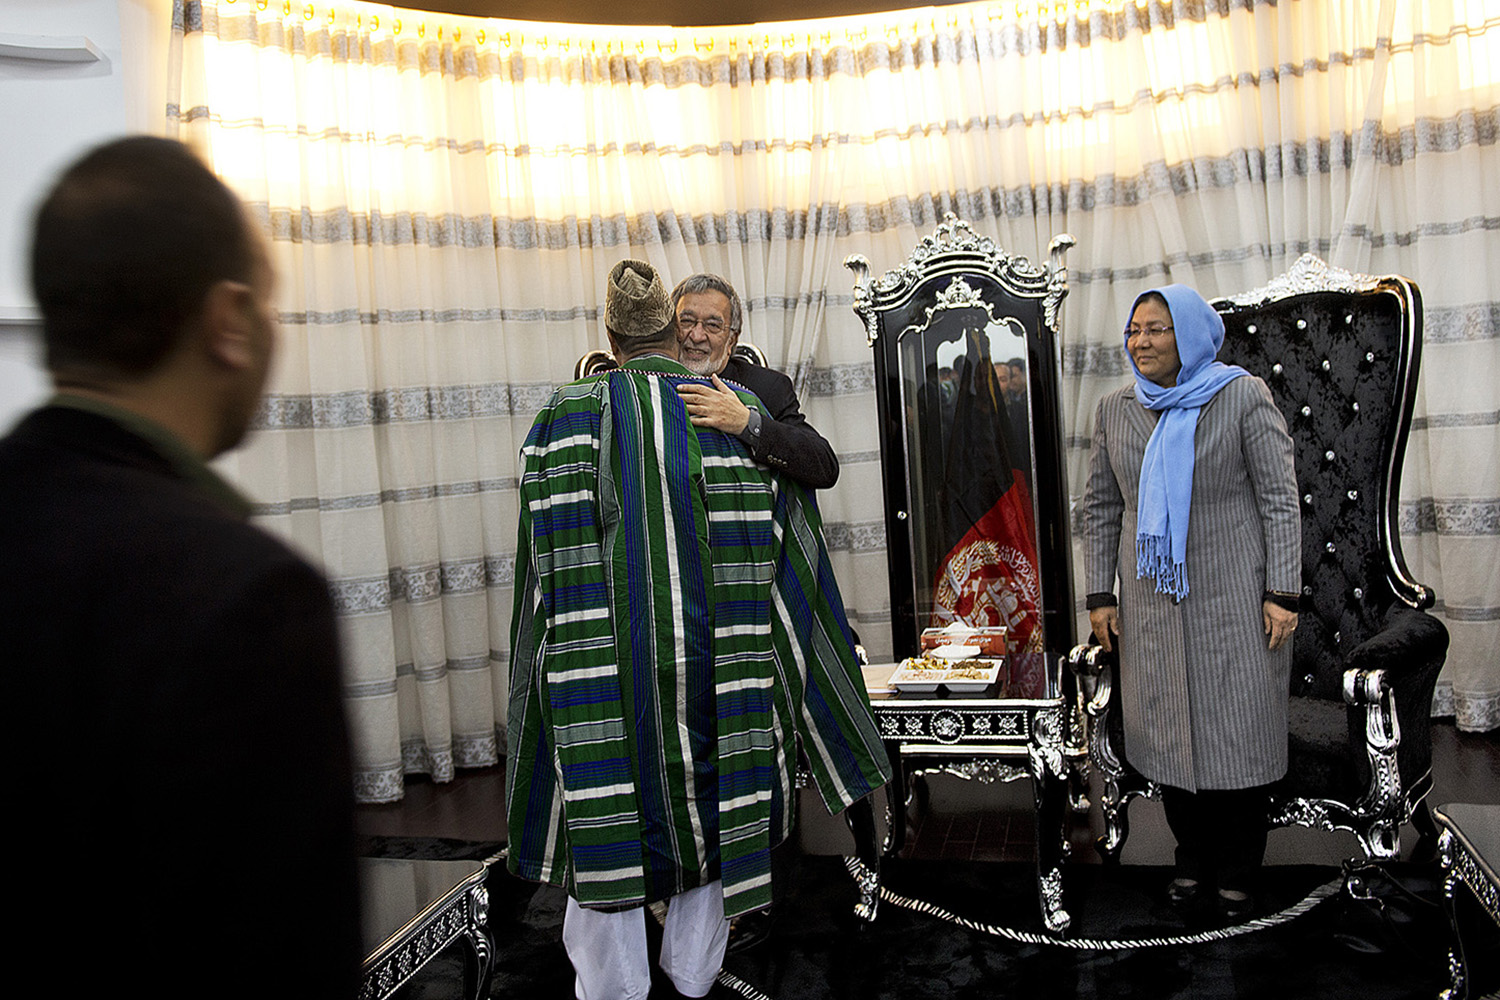 Afghan Presidential candidate Zalmai Rassoul and Vice Presidential candidate Habiba Sarabi greet visitors before attending a rally in Mazar-i-Sharif, Afghanistan, March 27, 2014.